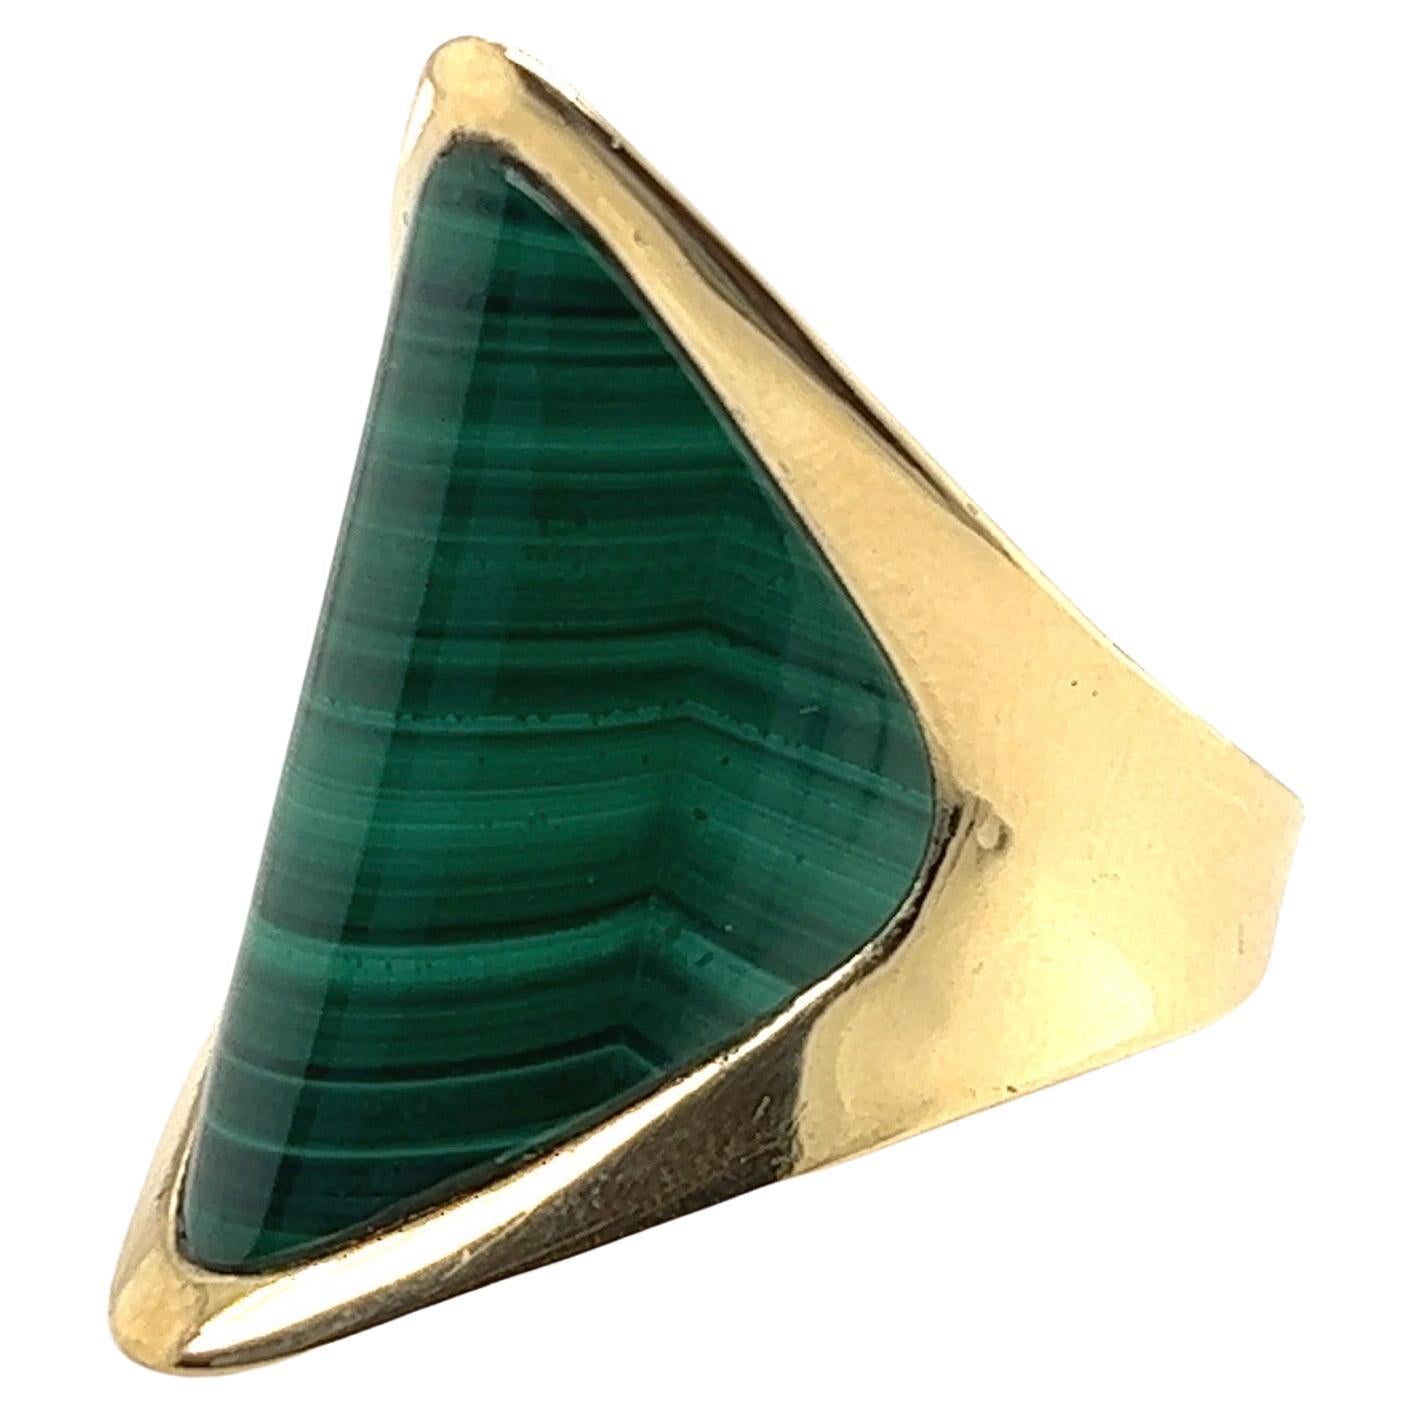 Piaget 18 Karat Yellow Gold and Malachite Cocktail Ring, circa 1970s For Sale